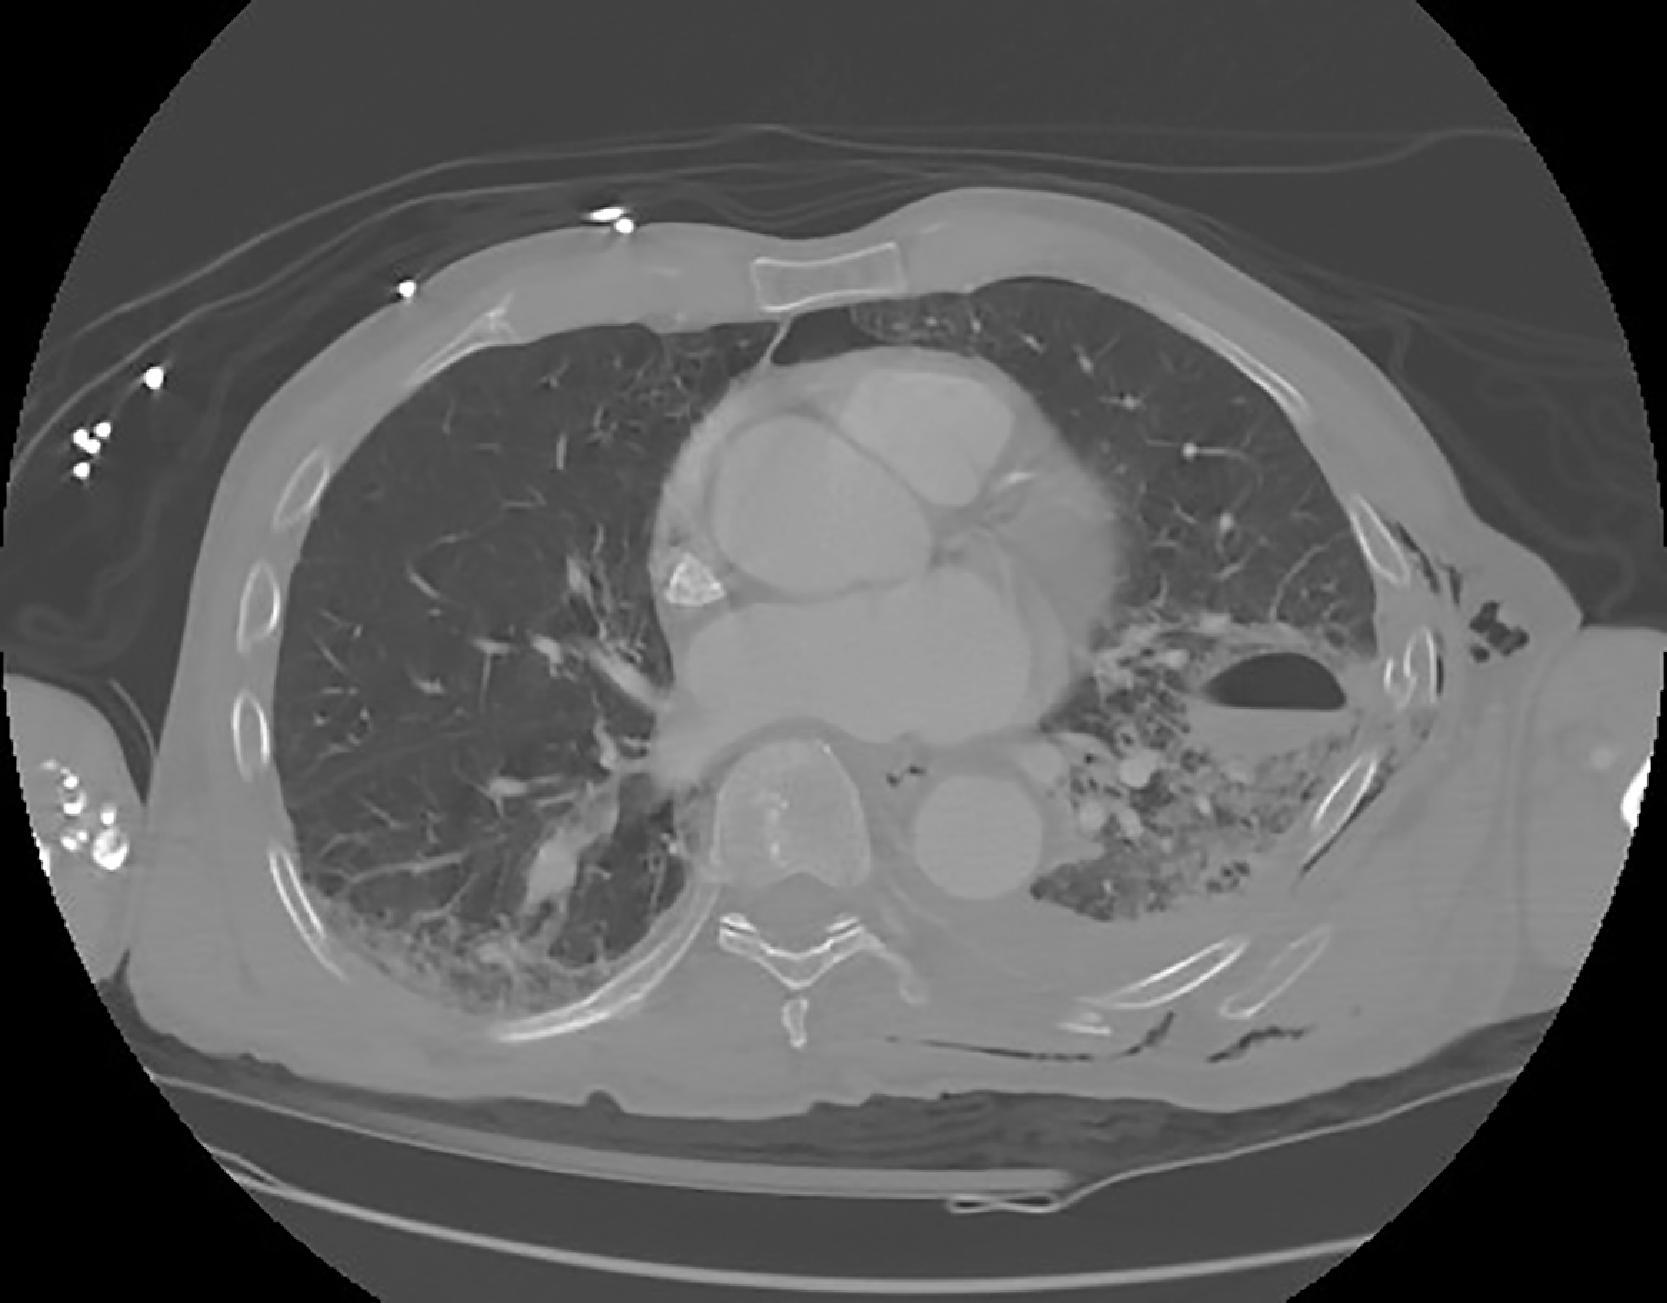 FIG. 2, Large left pneumatocele, hemothorax, subcutaneous emphysema, rib fractures, and pulmonary contusions after a blunt assault inflicted by beating with a golf club.